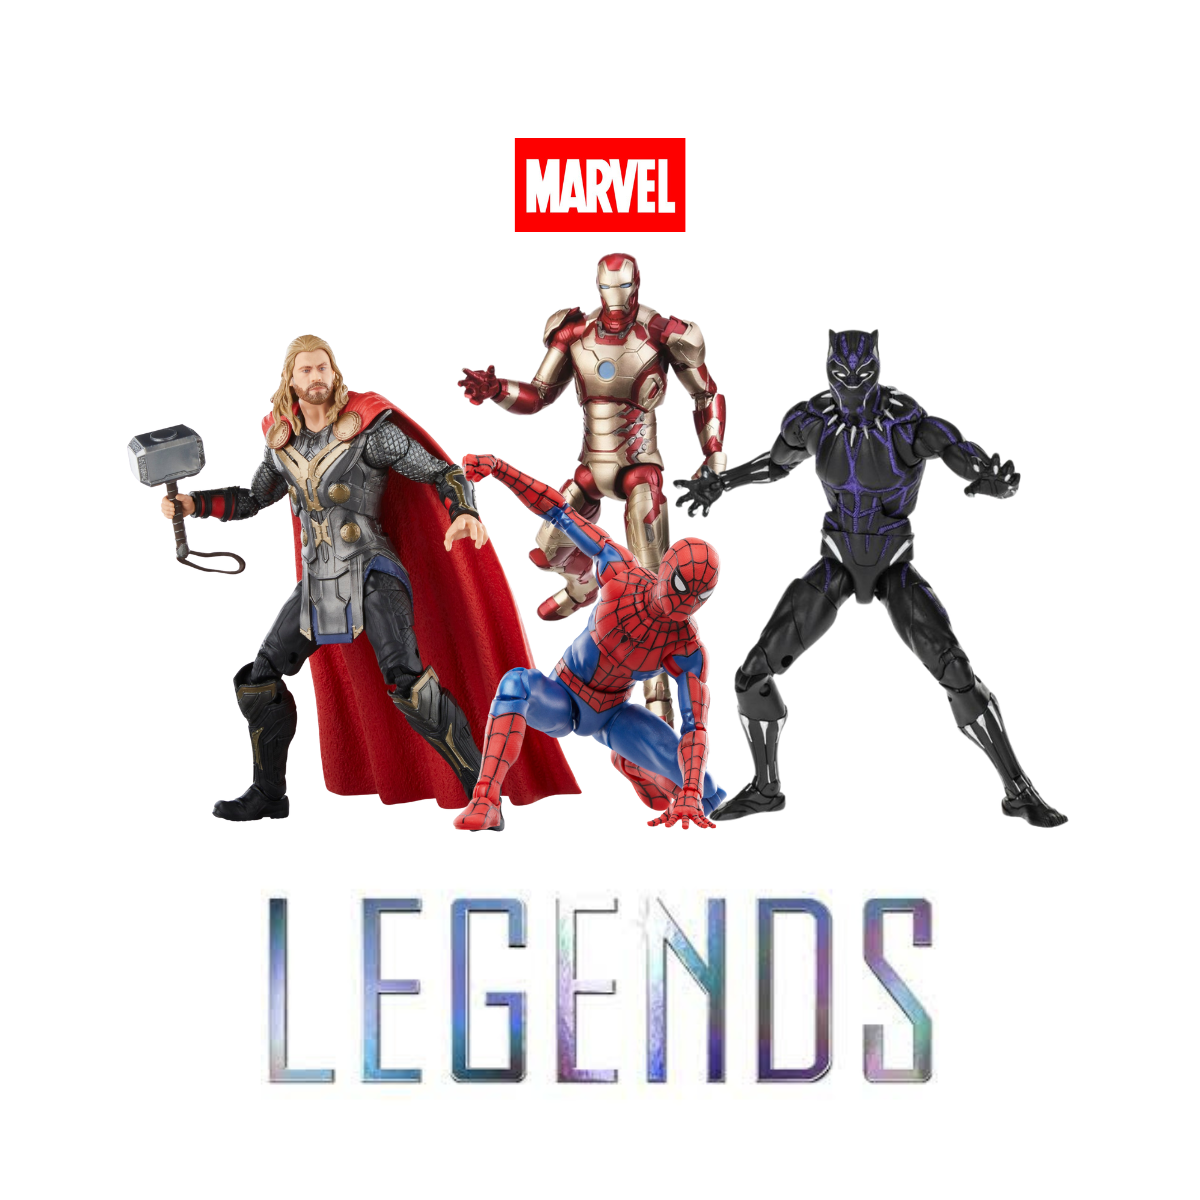 Are Marvel Legends Worth the Collecting Craze? A Fan's Guide